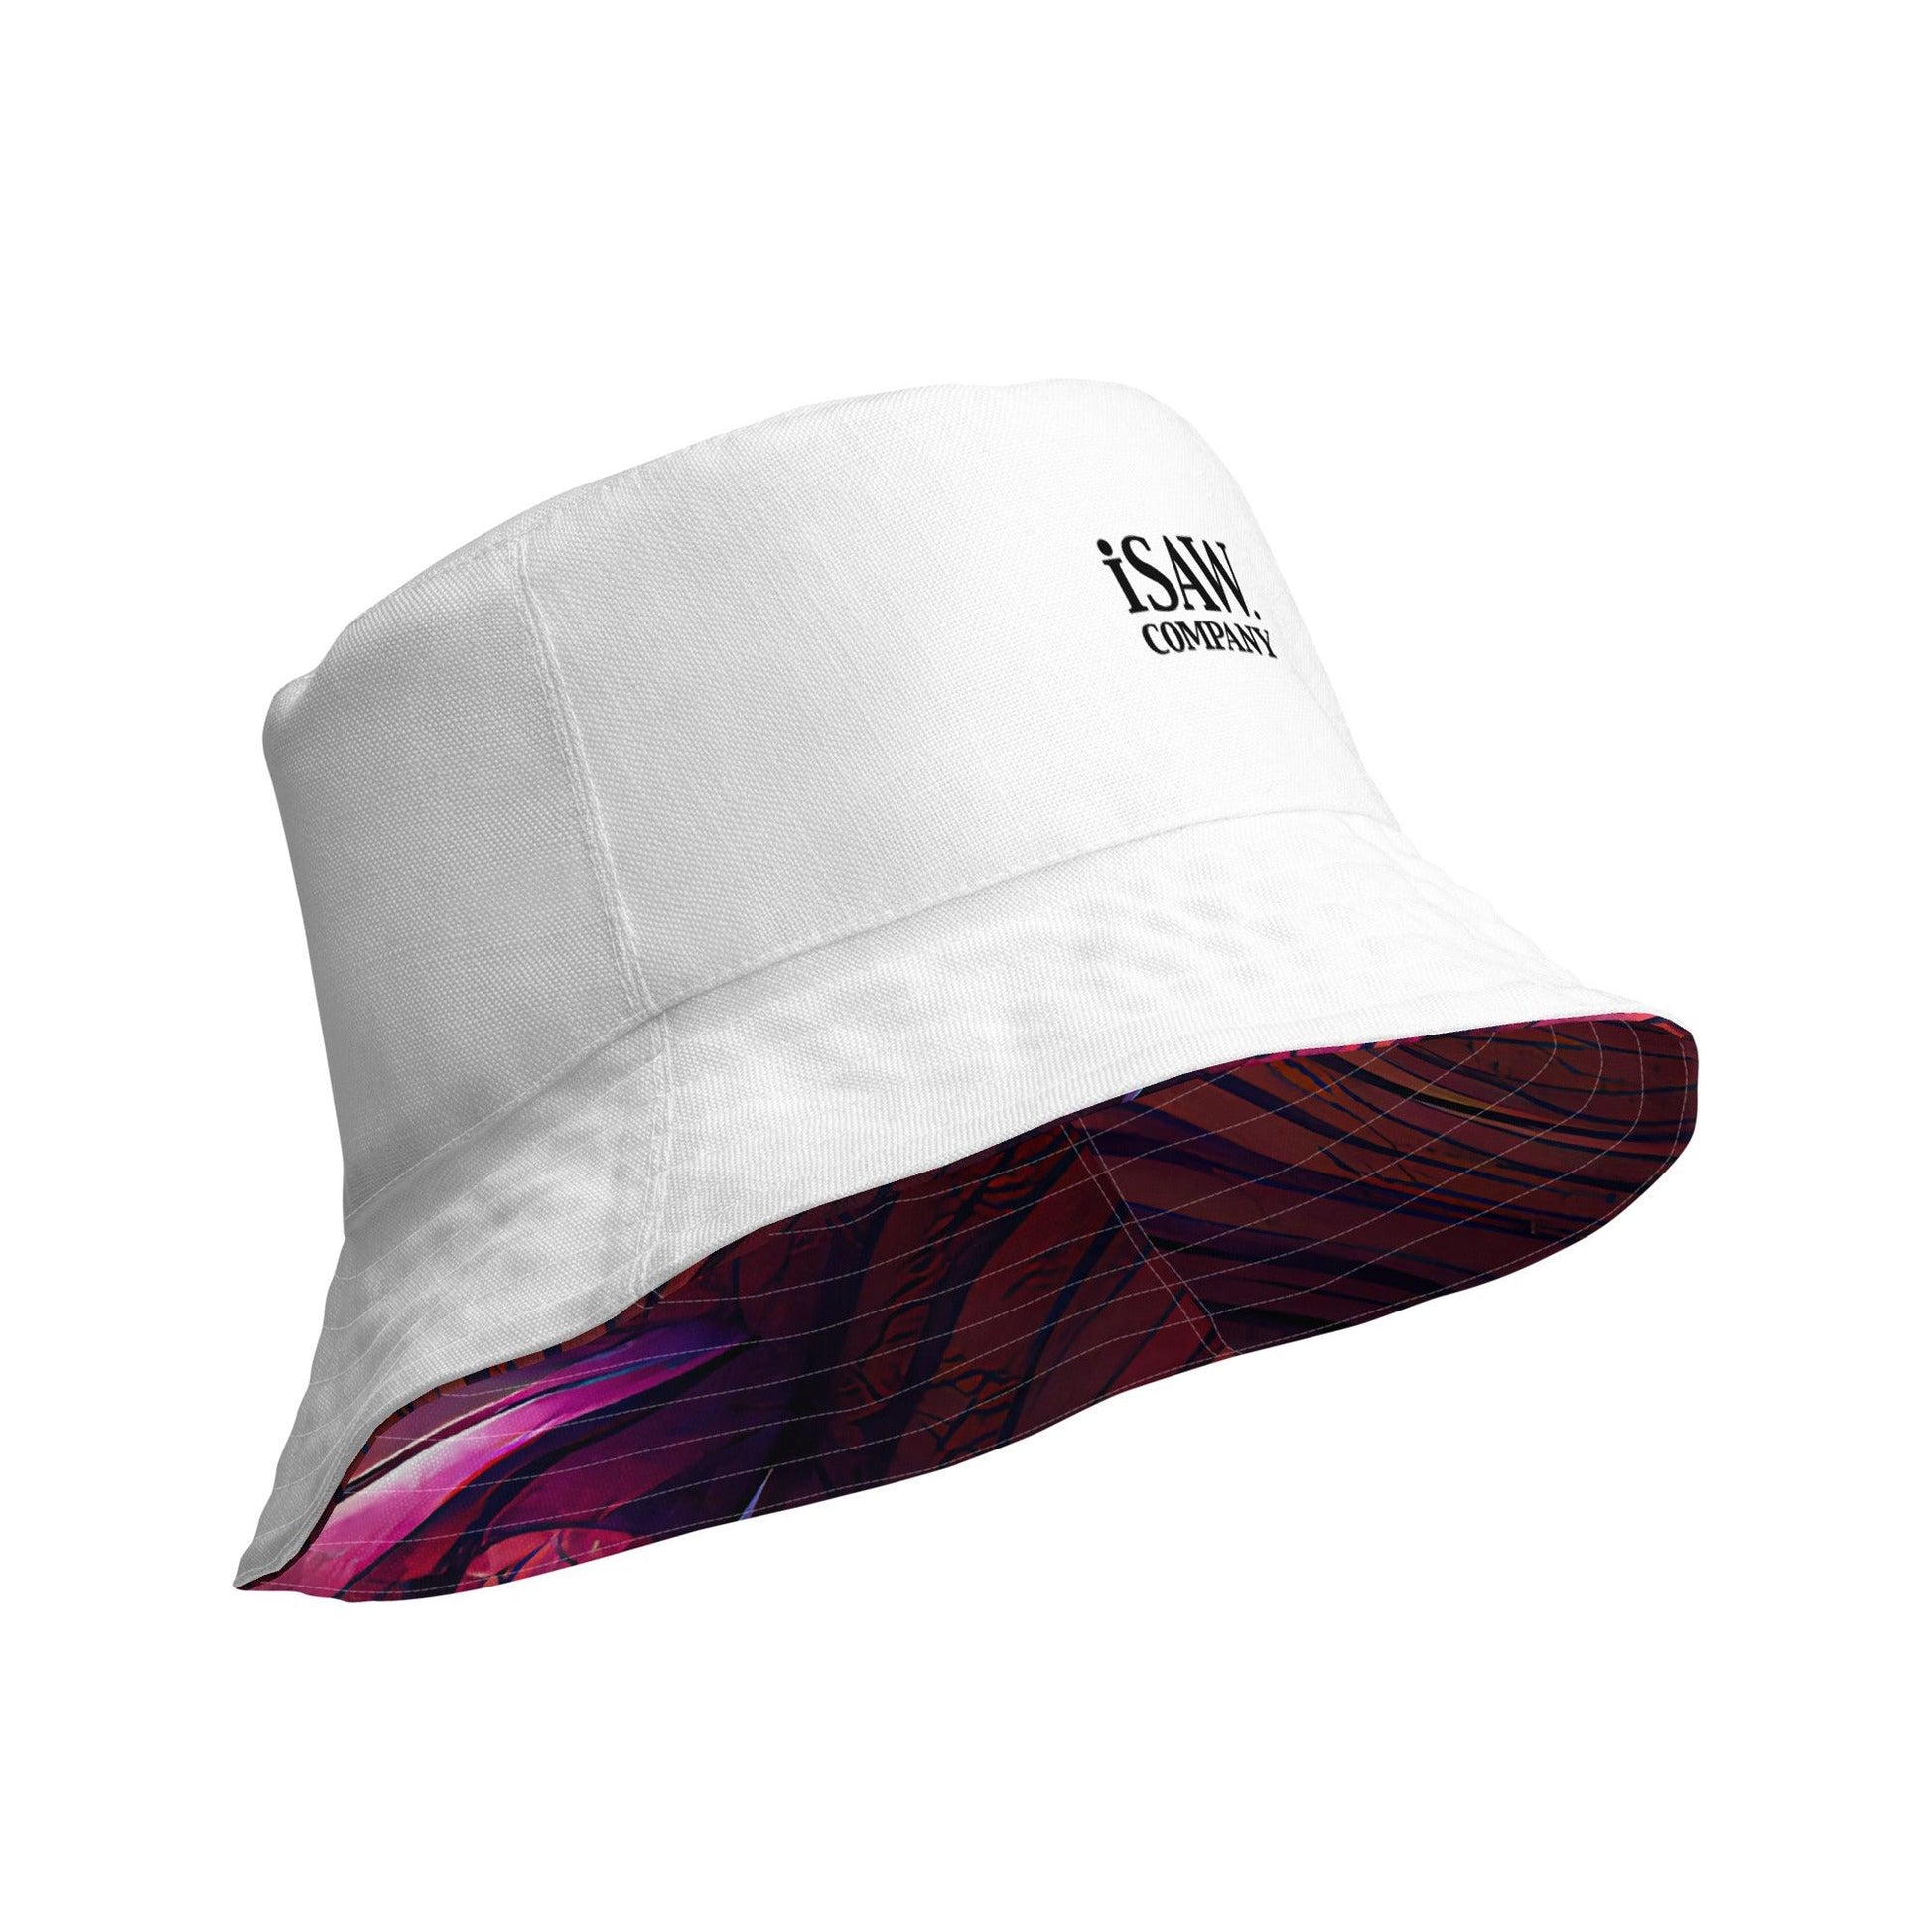 iSAW Reversible White Bucket Hat - iSAW Company